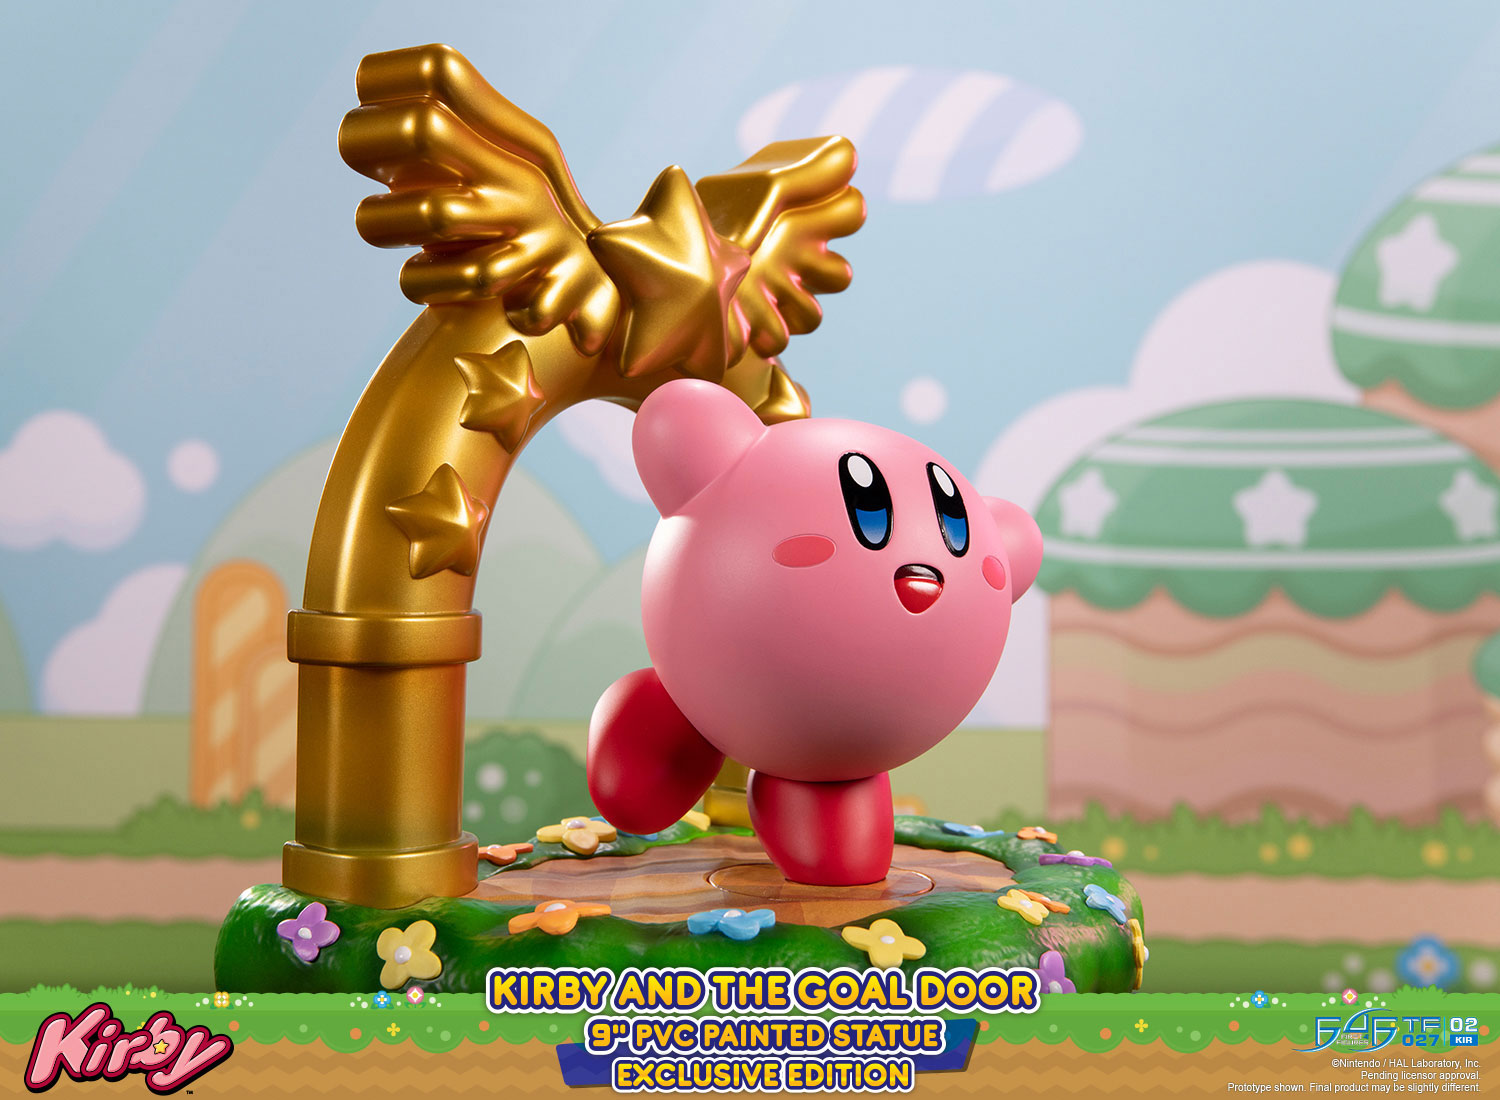 Kirby and the Goal Door (Exclusive Edition)